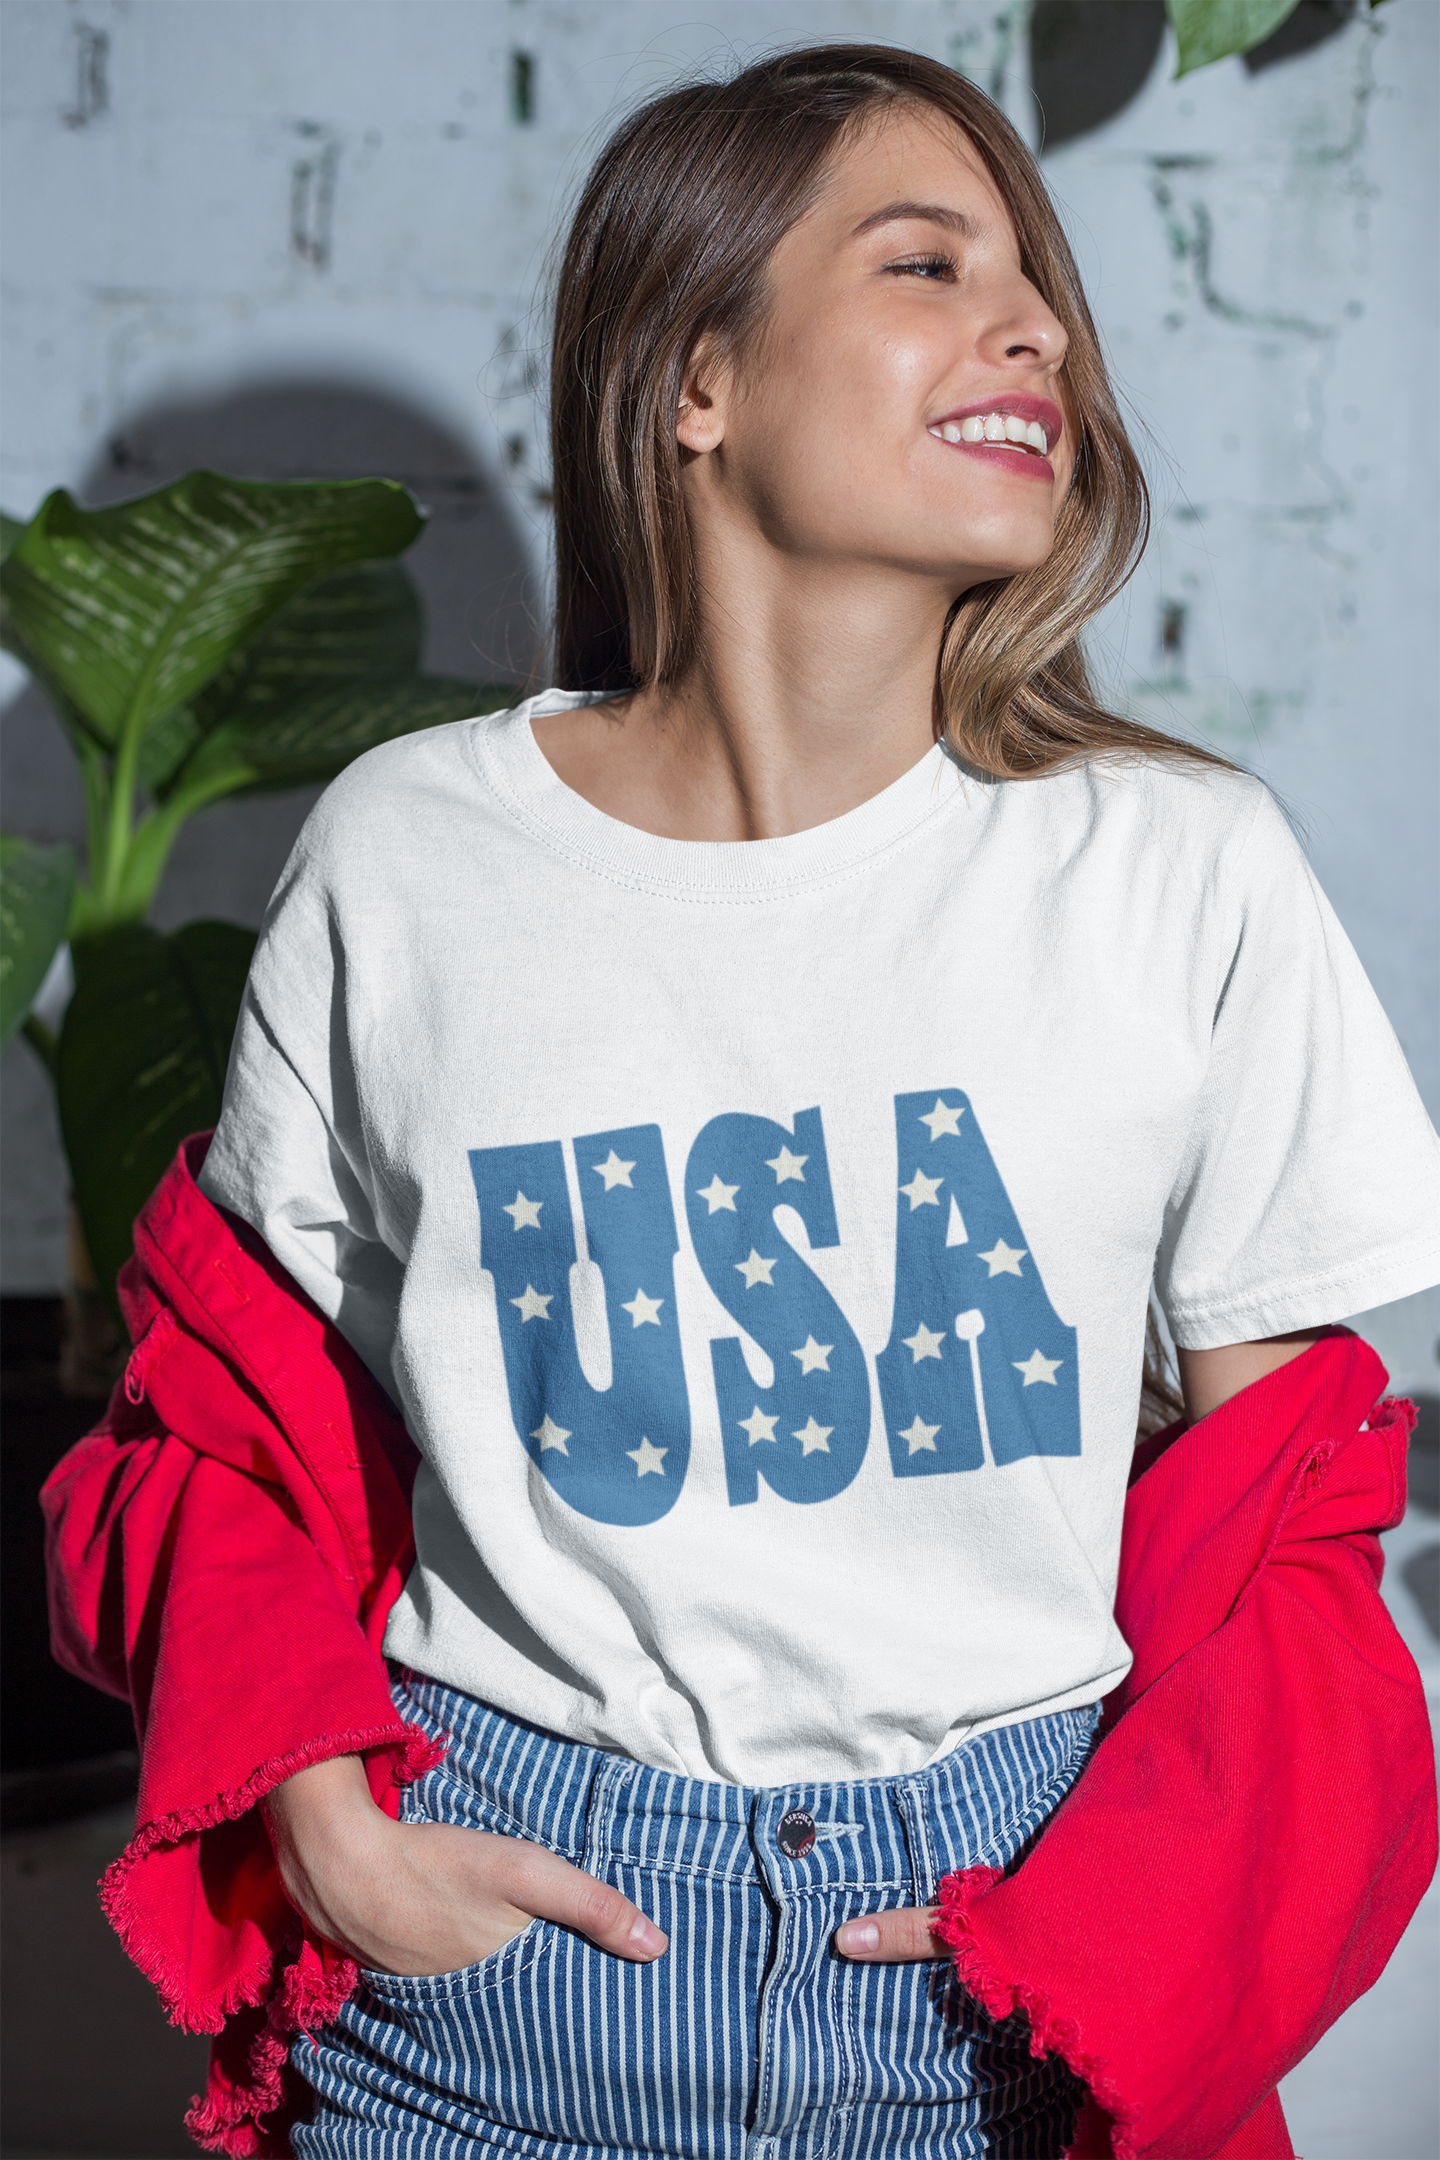 USA Bubbles and Stars Tee